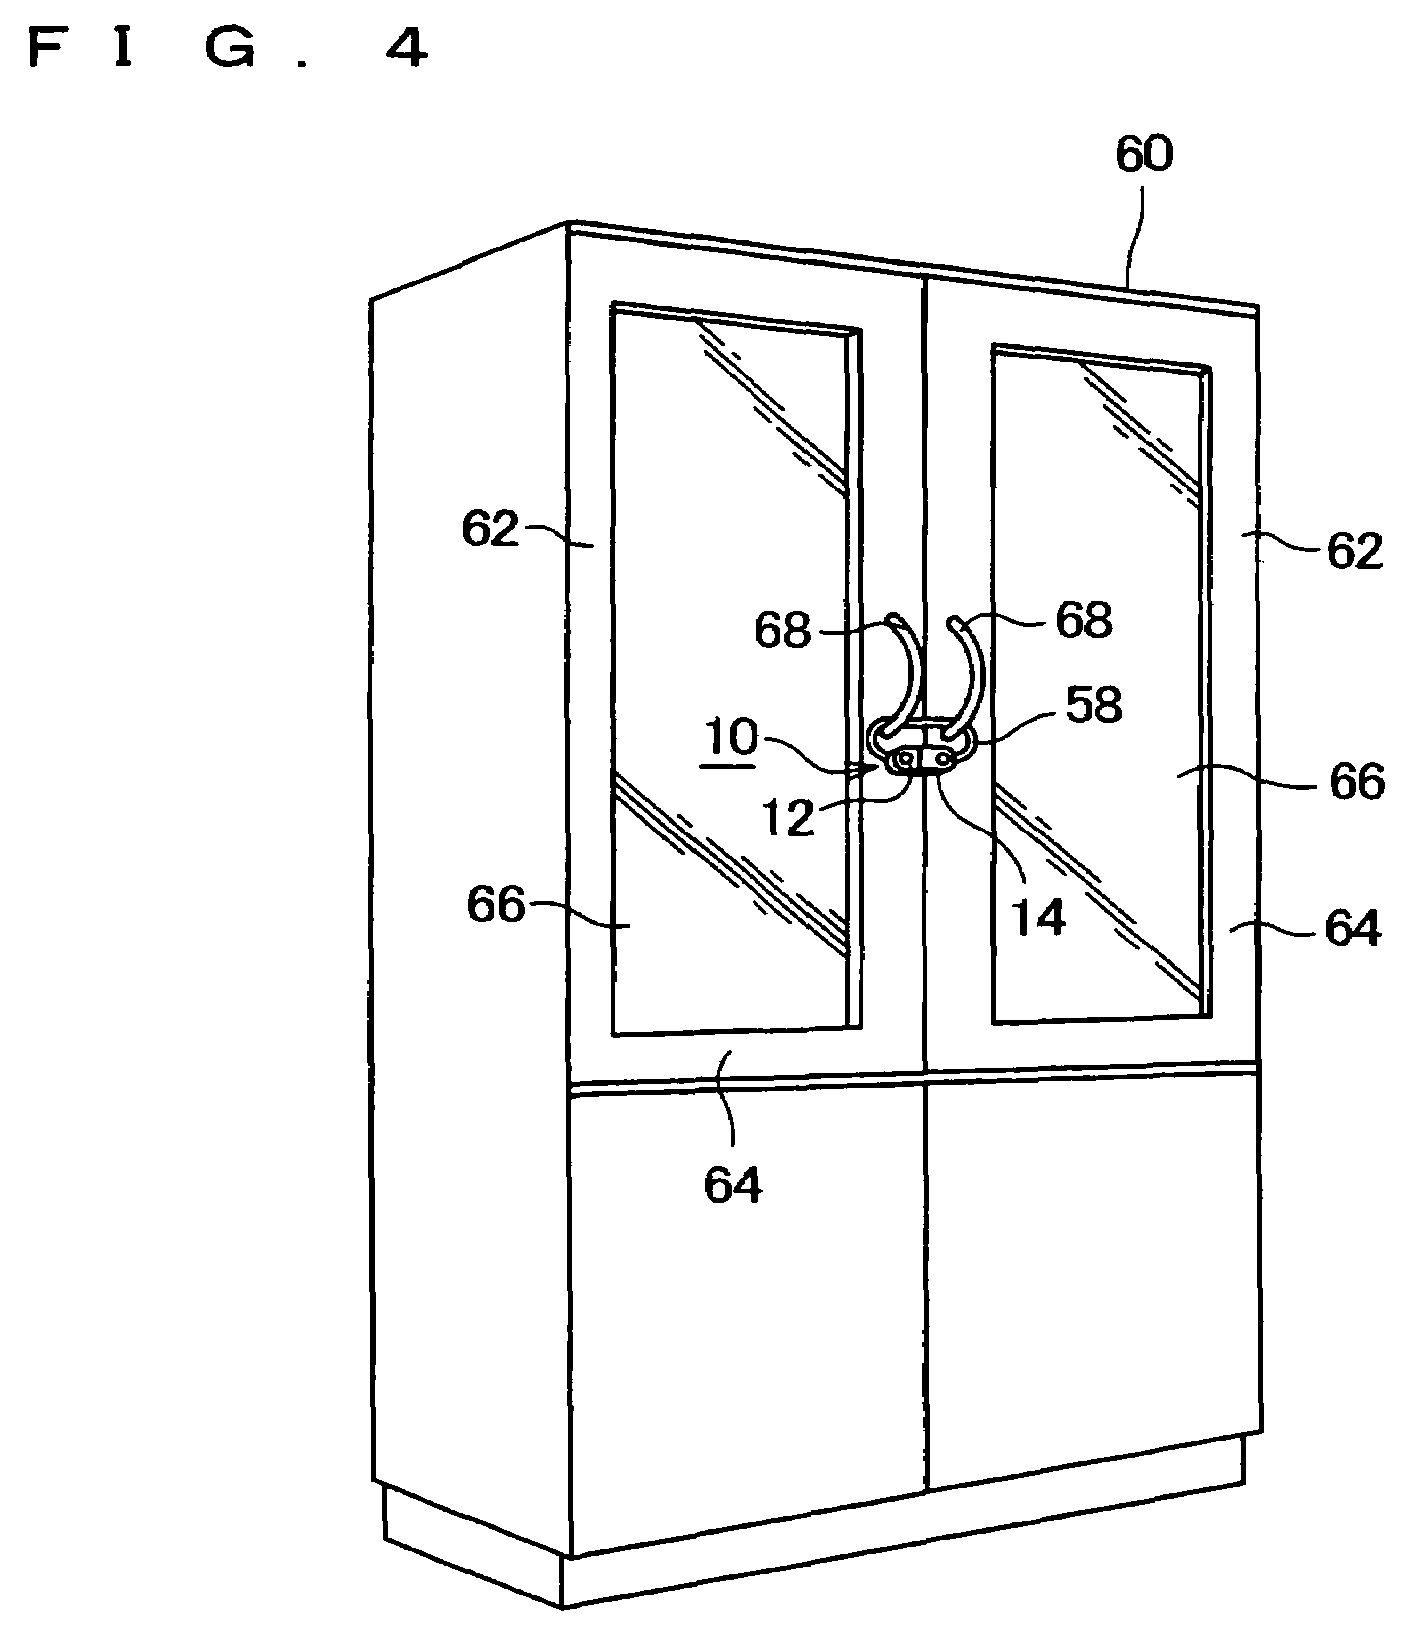 Magnetically actuated locking mechanism